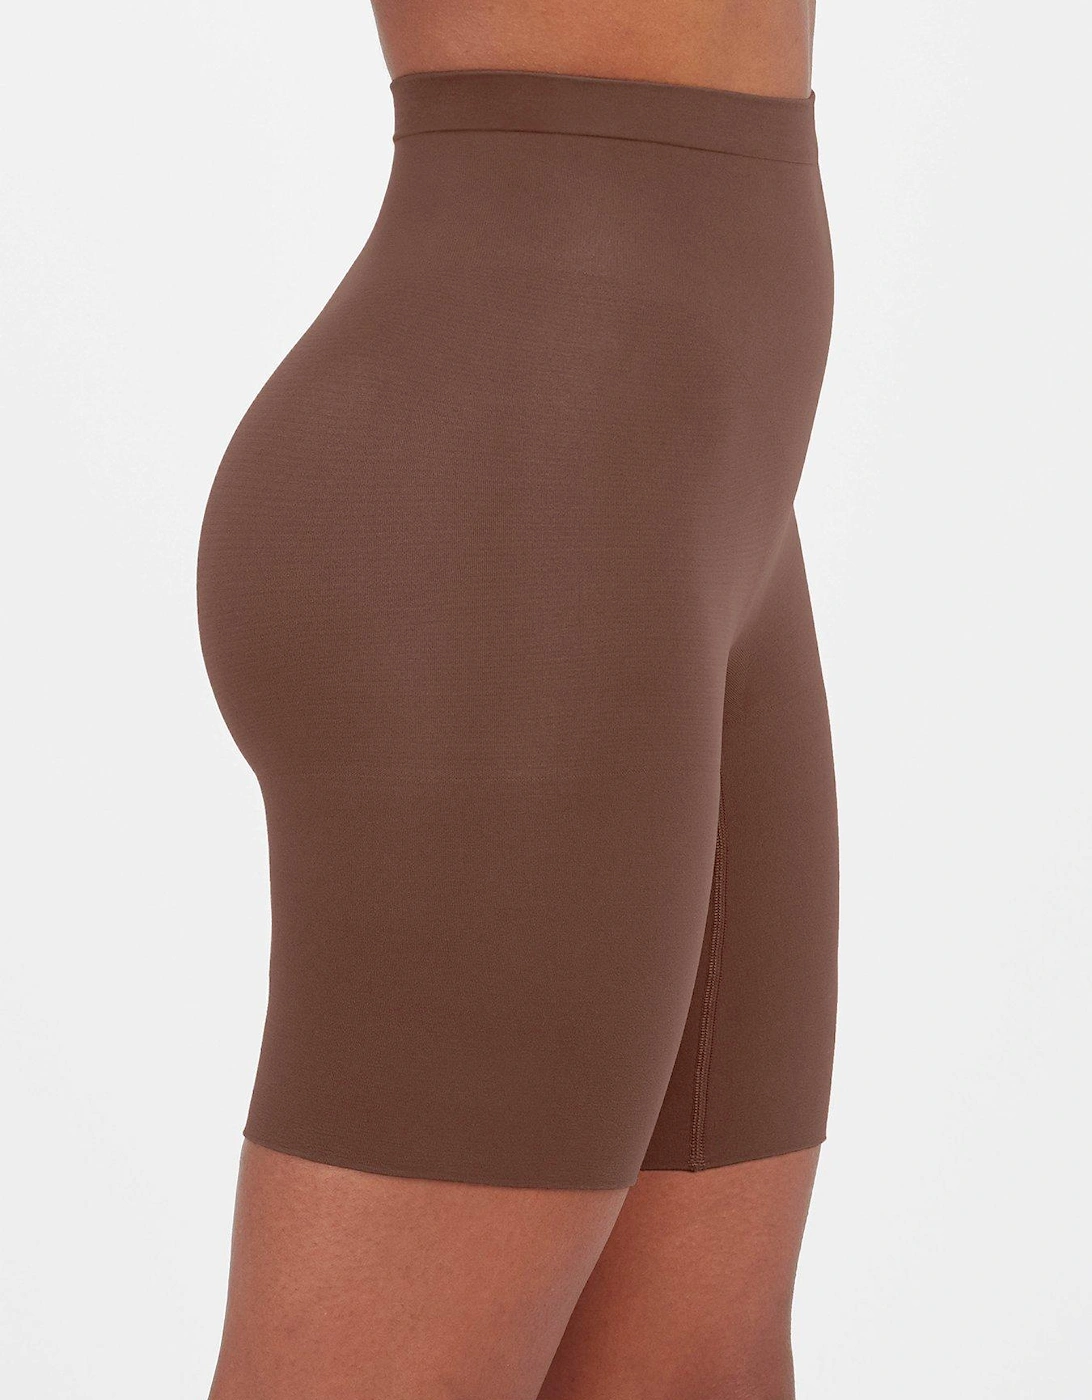 Everyday Seamless Shaping Short - Chestnut Brown